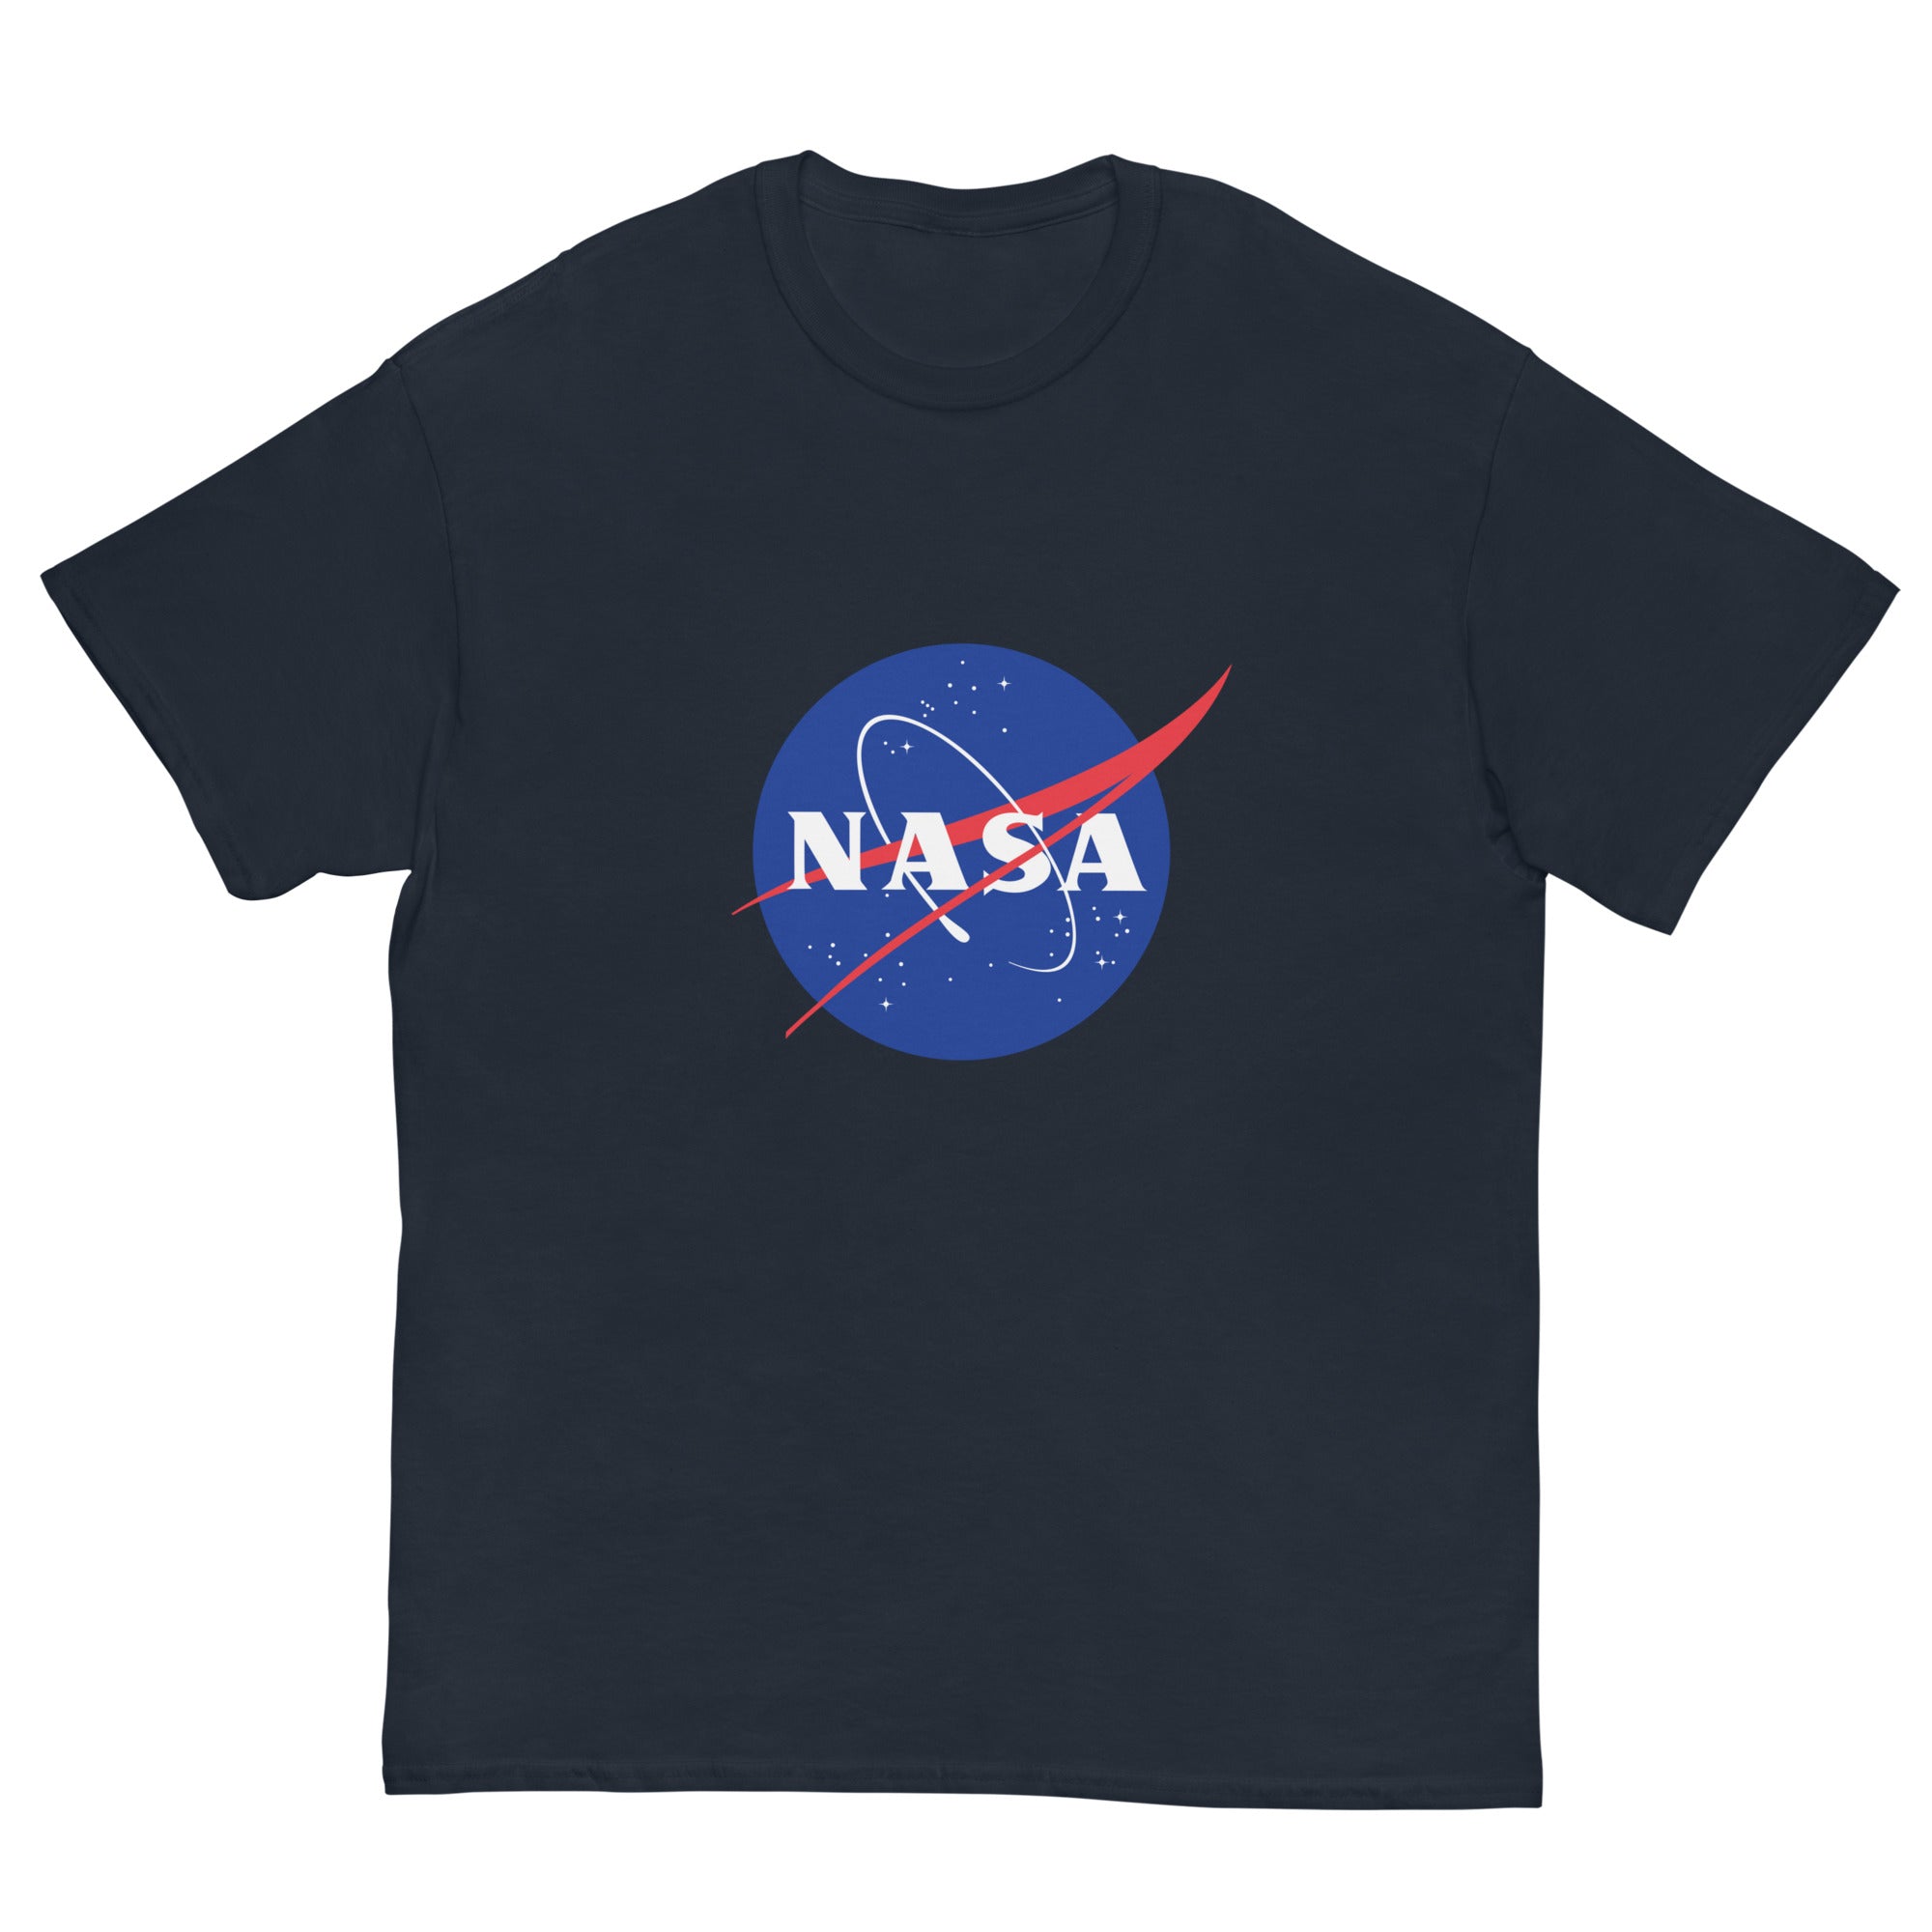 NASA 'MEATBALL'  T-SHIRT - The Space Store